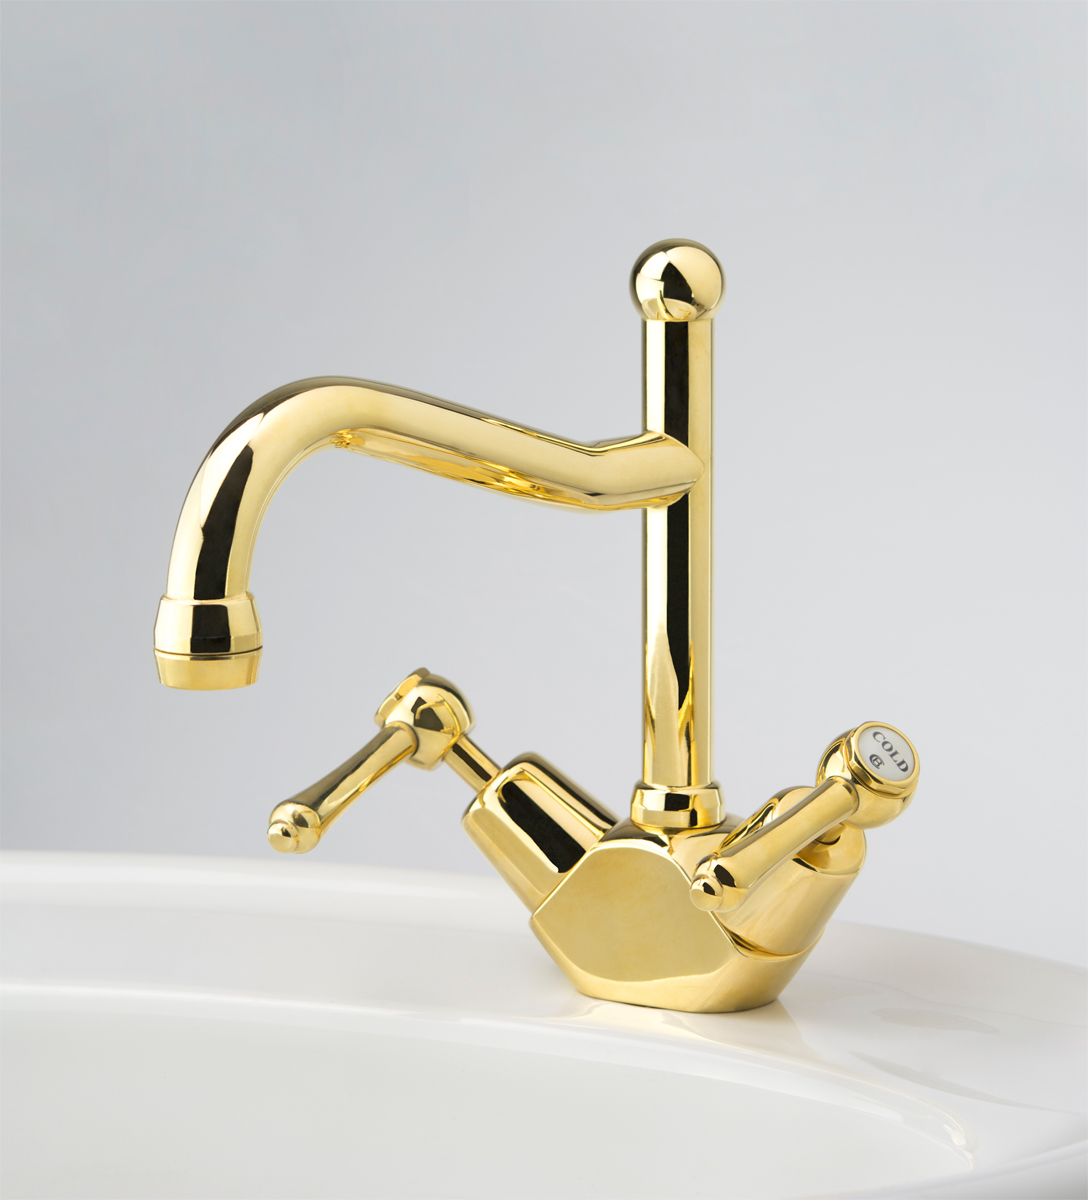 Olde Adelaide Basin Duo Mixer with Swivel Spout & Roulette Lever Handles in Antique Brass